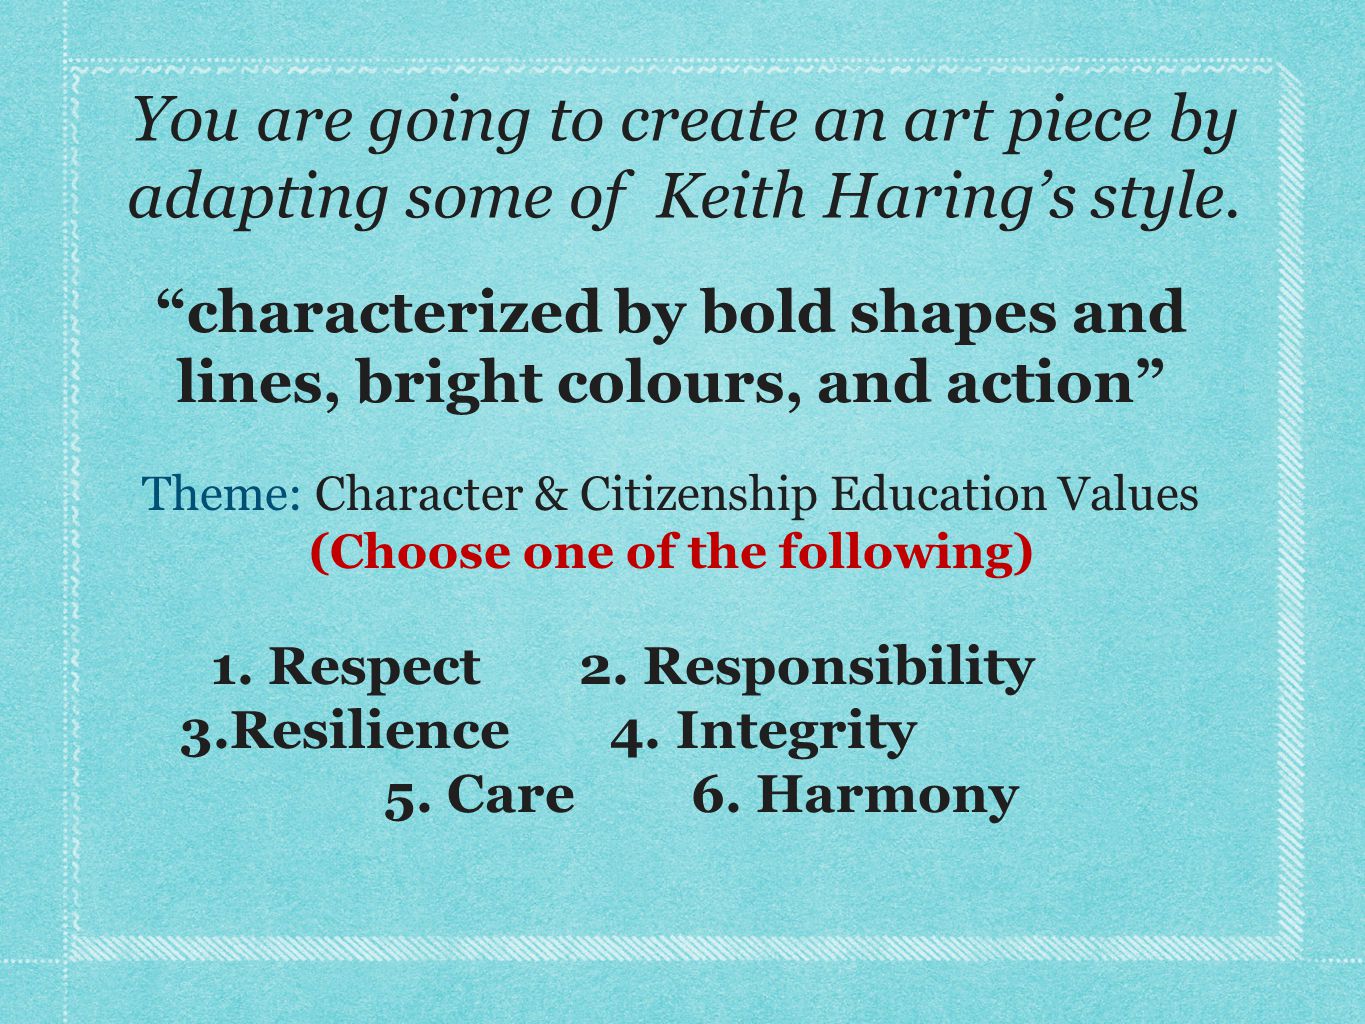 You are going to create an art piece by adapting some of Keith Haring’s style.